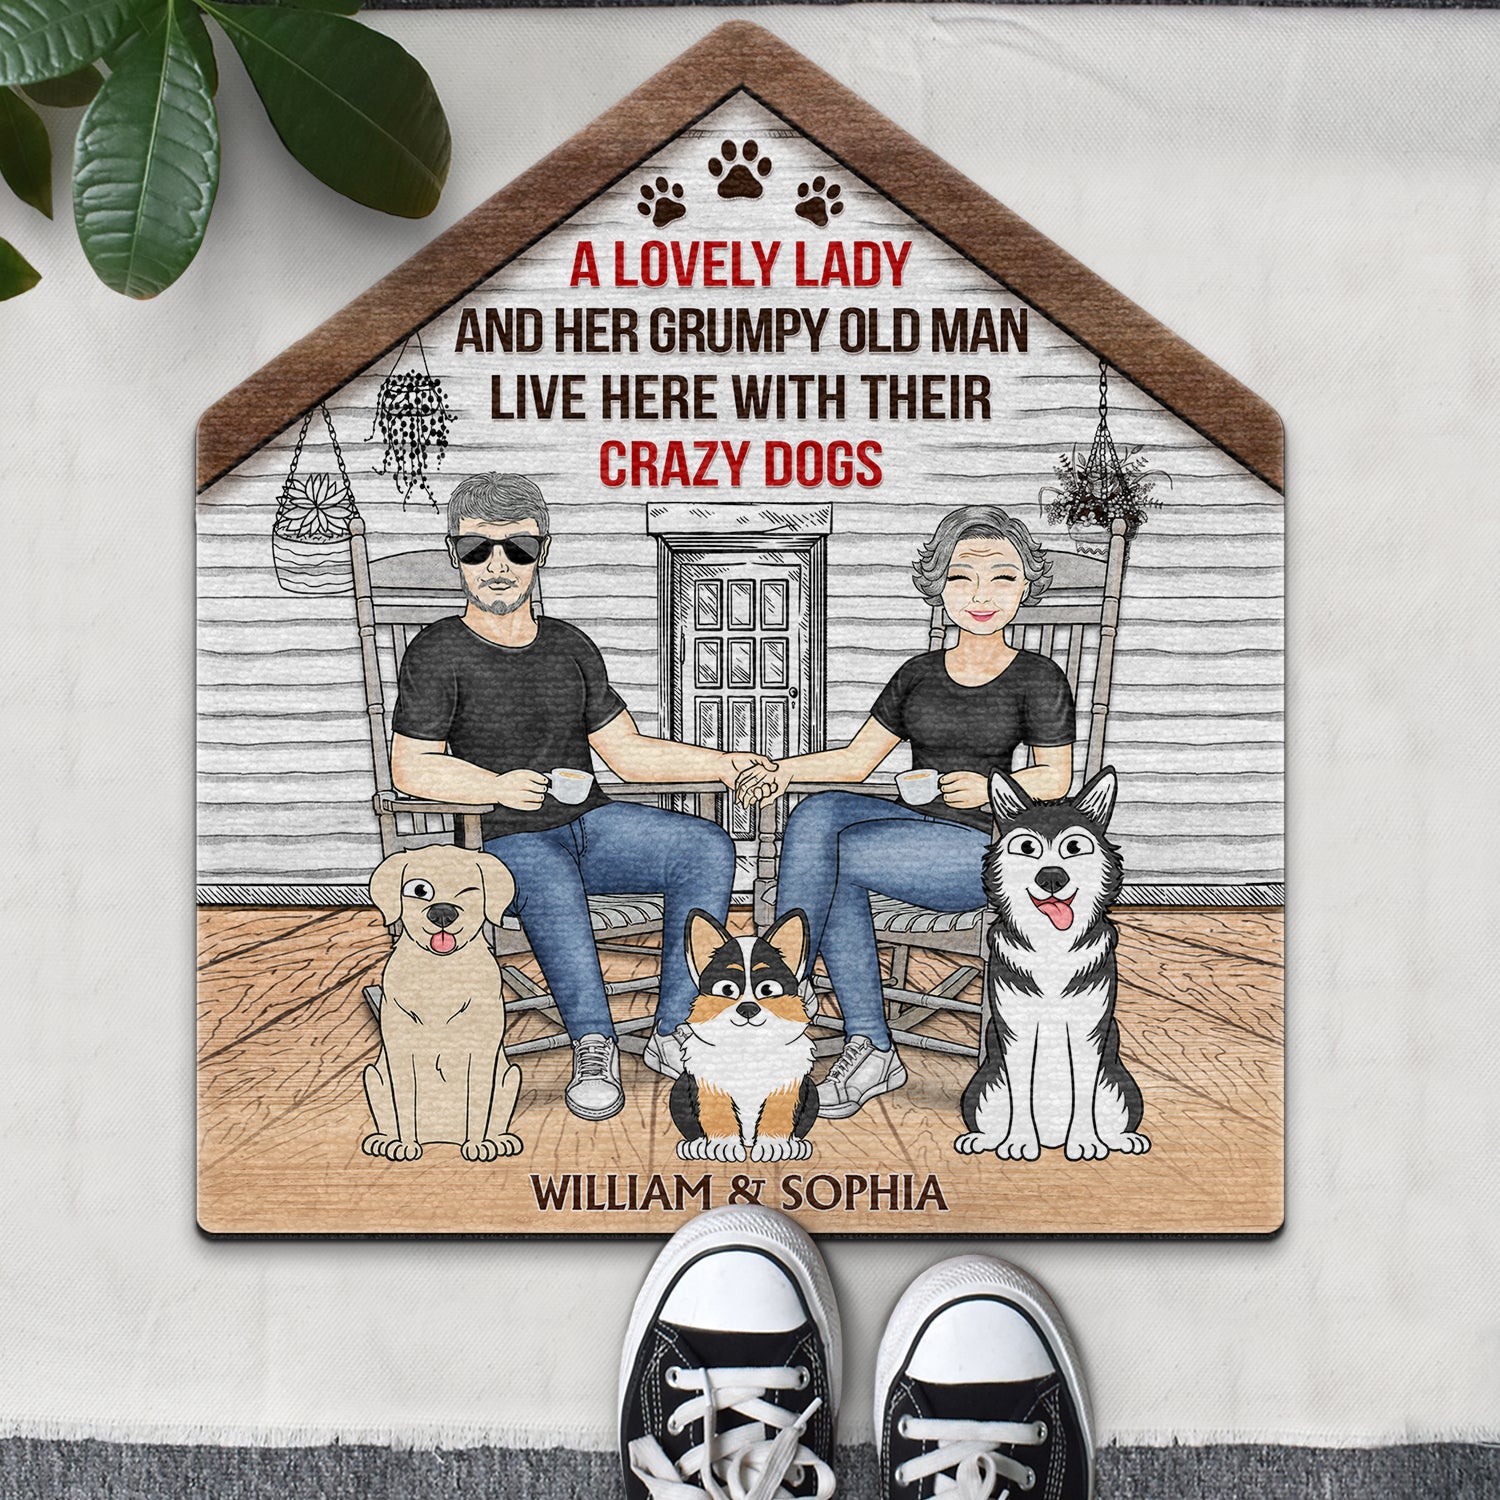 A Lovely Lady And Her Grumpy Old Man Live Here With Their Crazy Dogs - Gift For Couples, Pet Lovers And Family - Personalized Custom Shaped Doormat